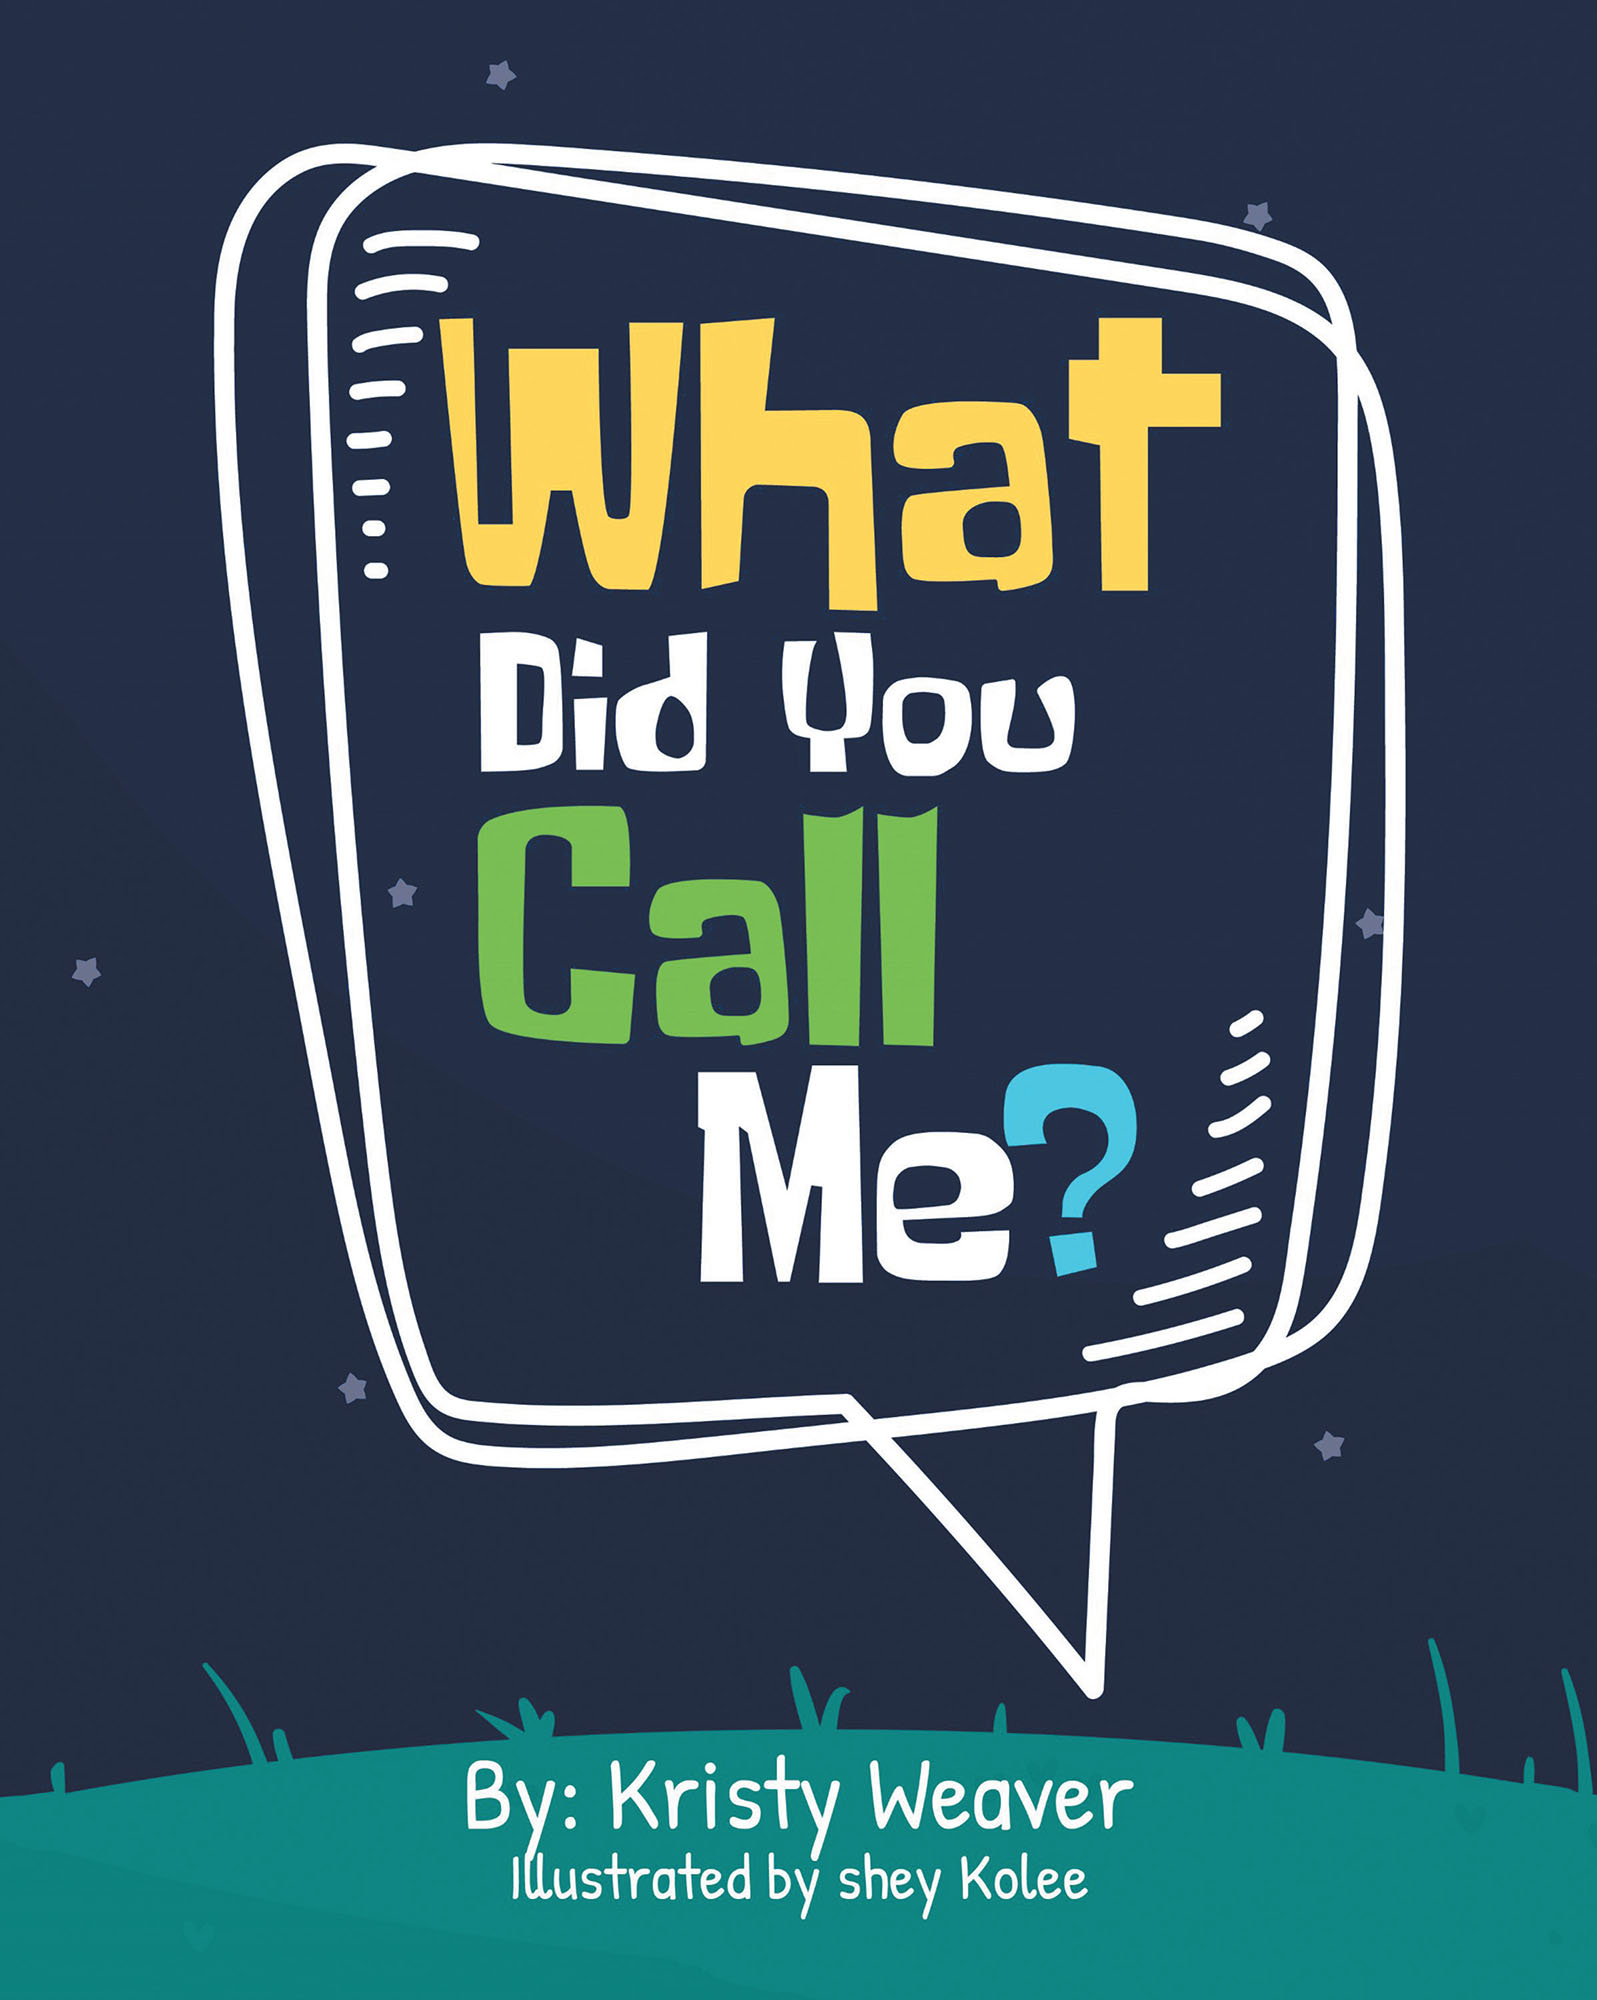 Kristy Weaver’s New Book, "What Did You Call Me?" is a Series of Insults and Funny Names That Real Children Have Created; Come See Their Inventiveness